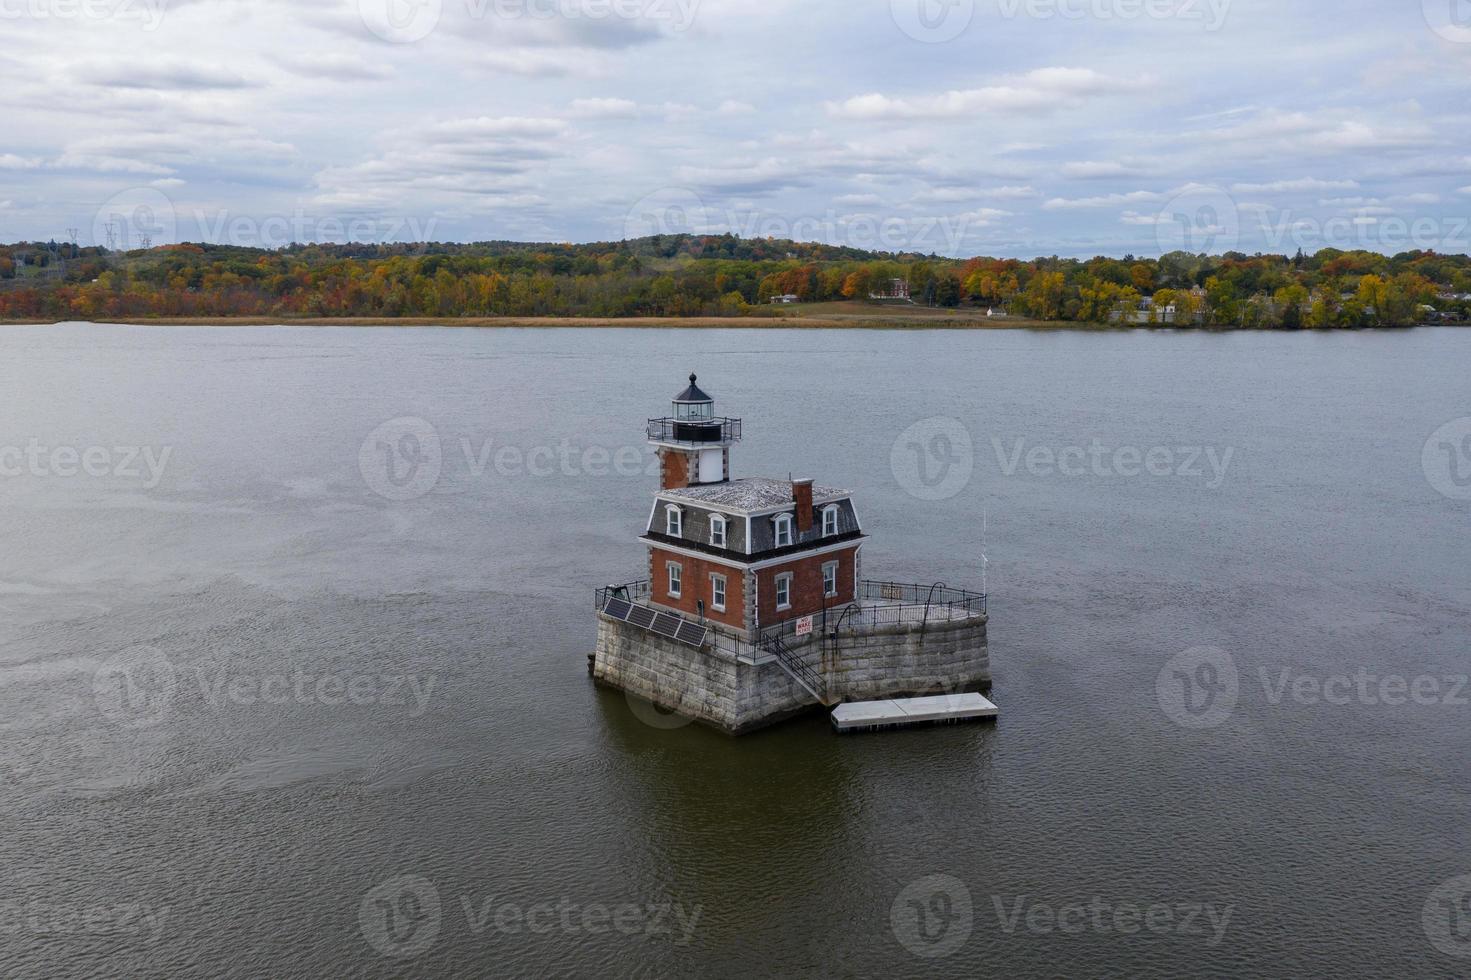 The Hudson Athens Lighthouse, sometimes called the Hudson City light, is a lighthouse located in the Hudson River in the state of New York photo